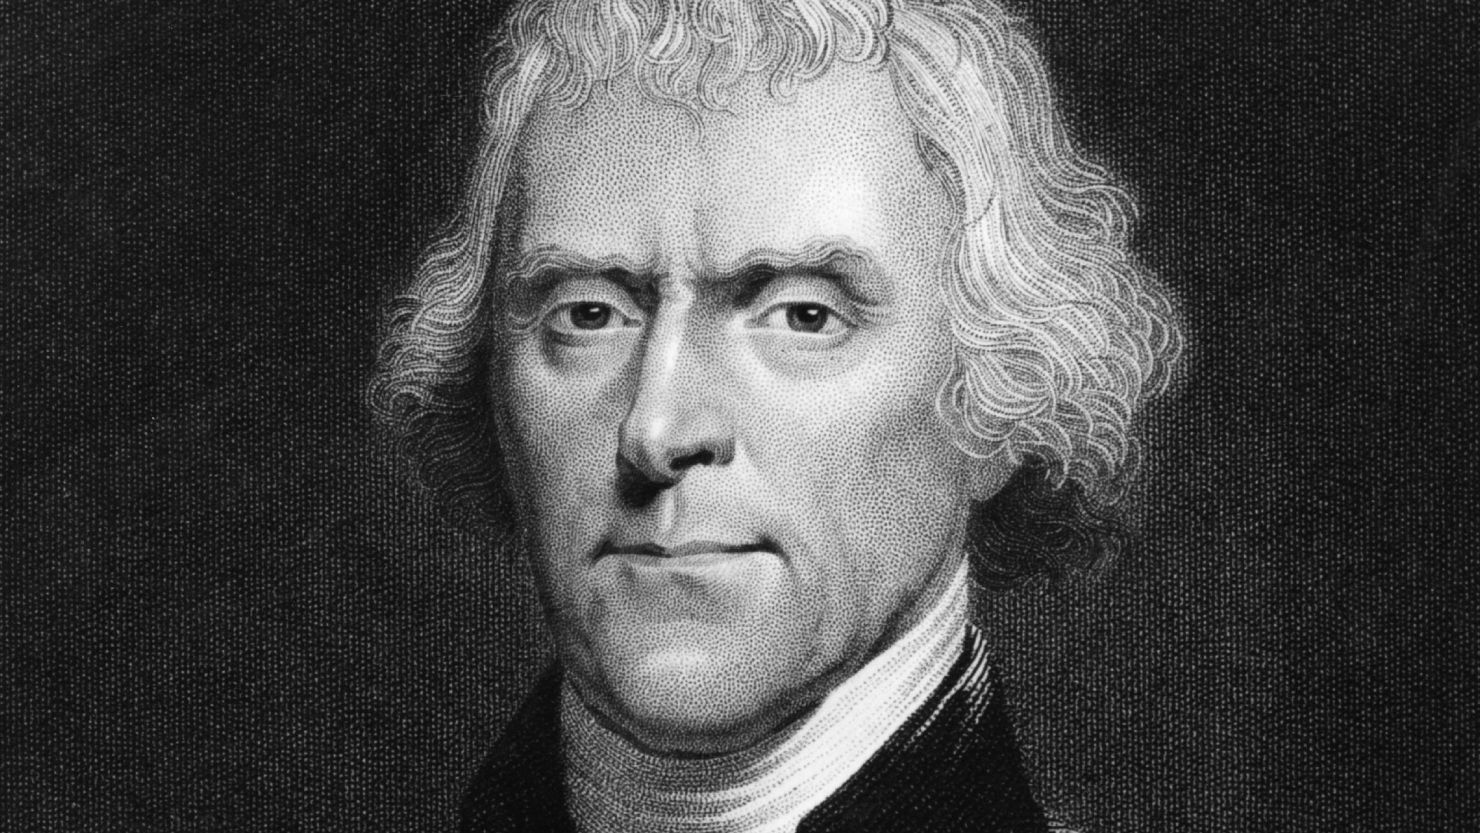 A quotation attributed to former President Thomas Jefferson, but not verified by researchers, got CNN commenters talking.